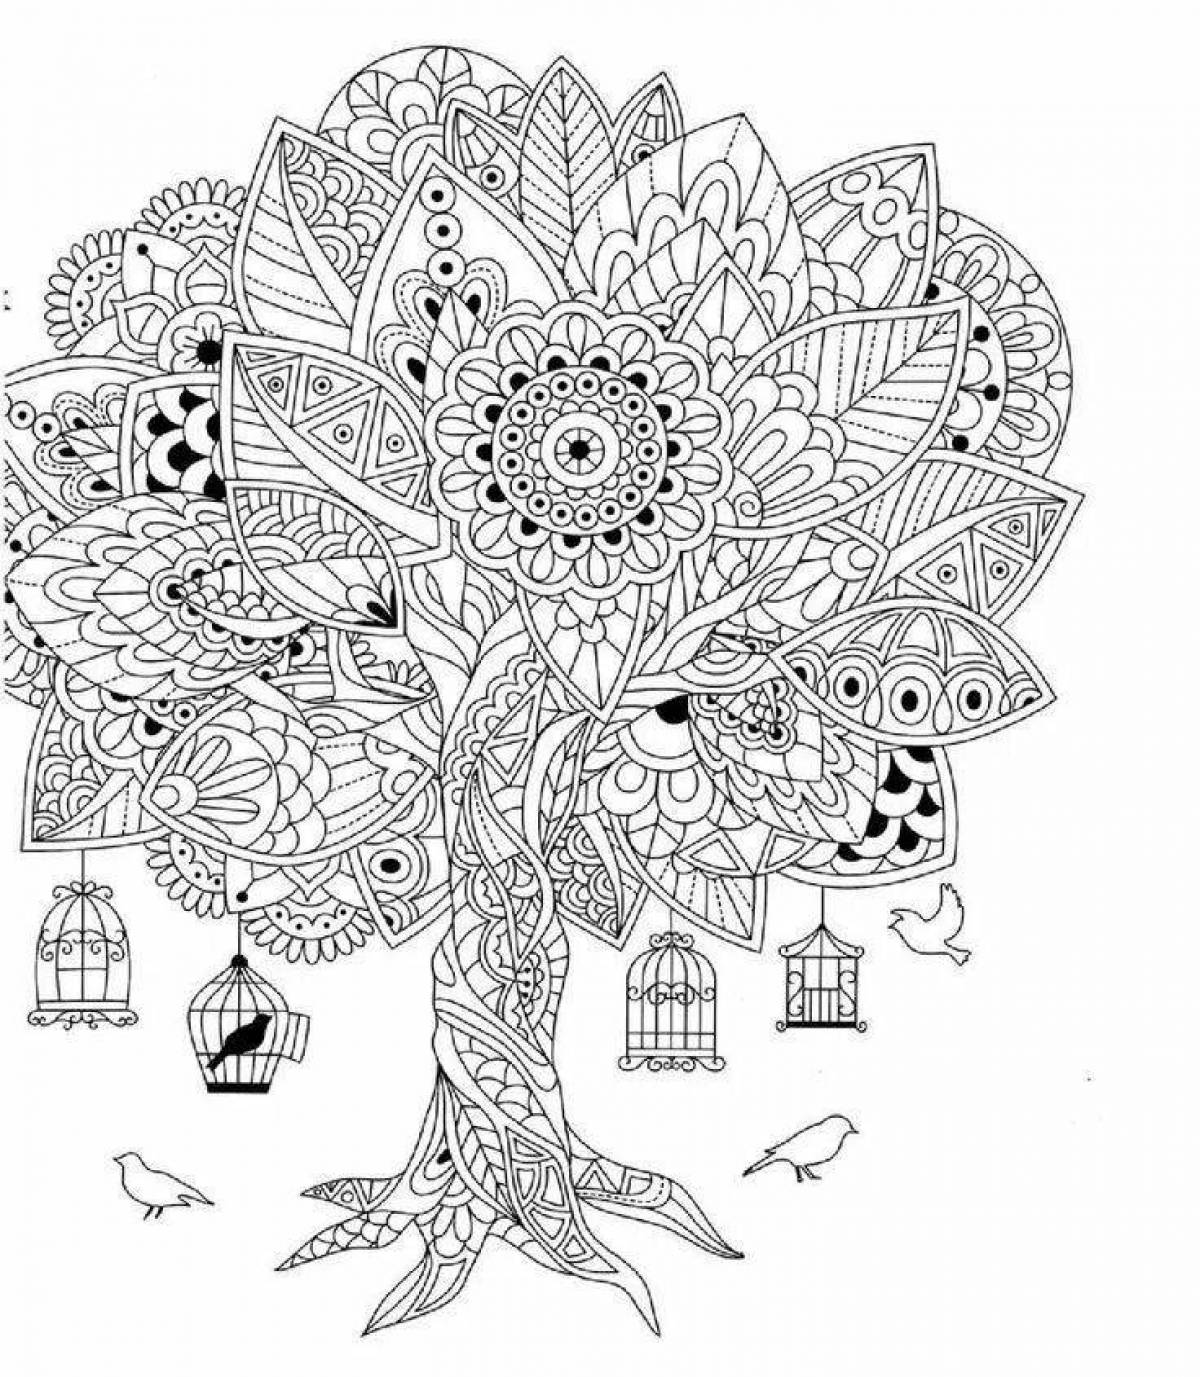 Soothing coloring book